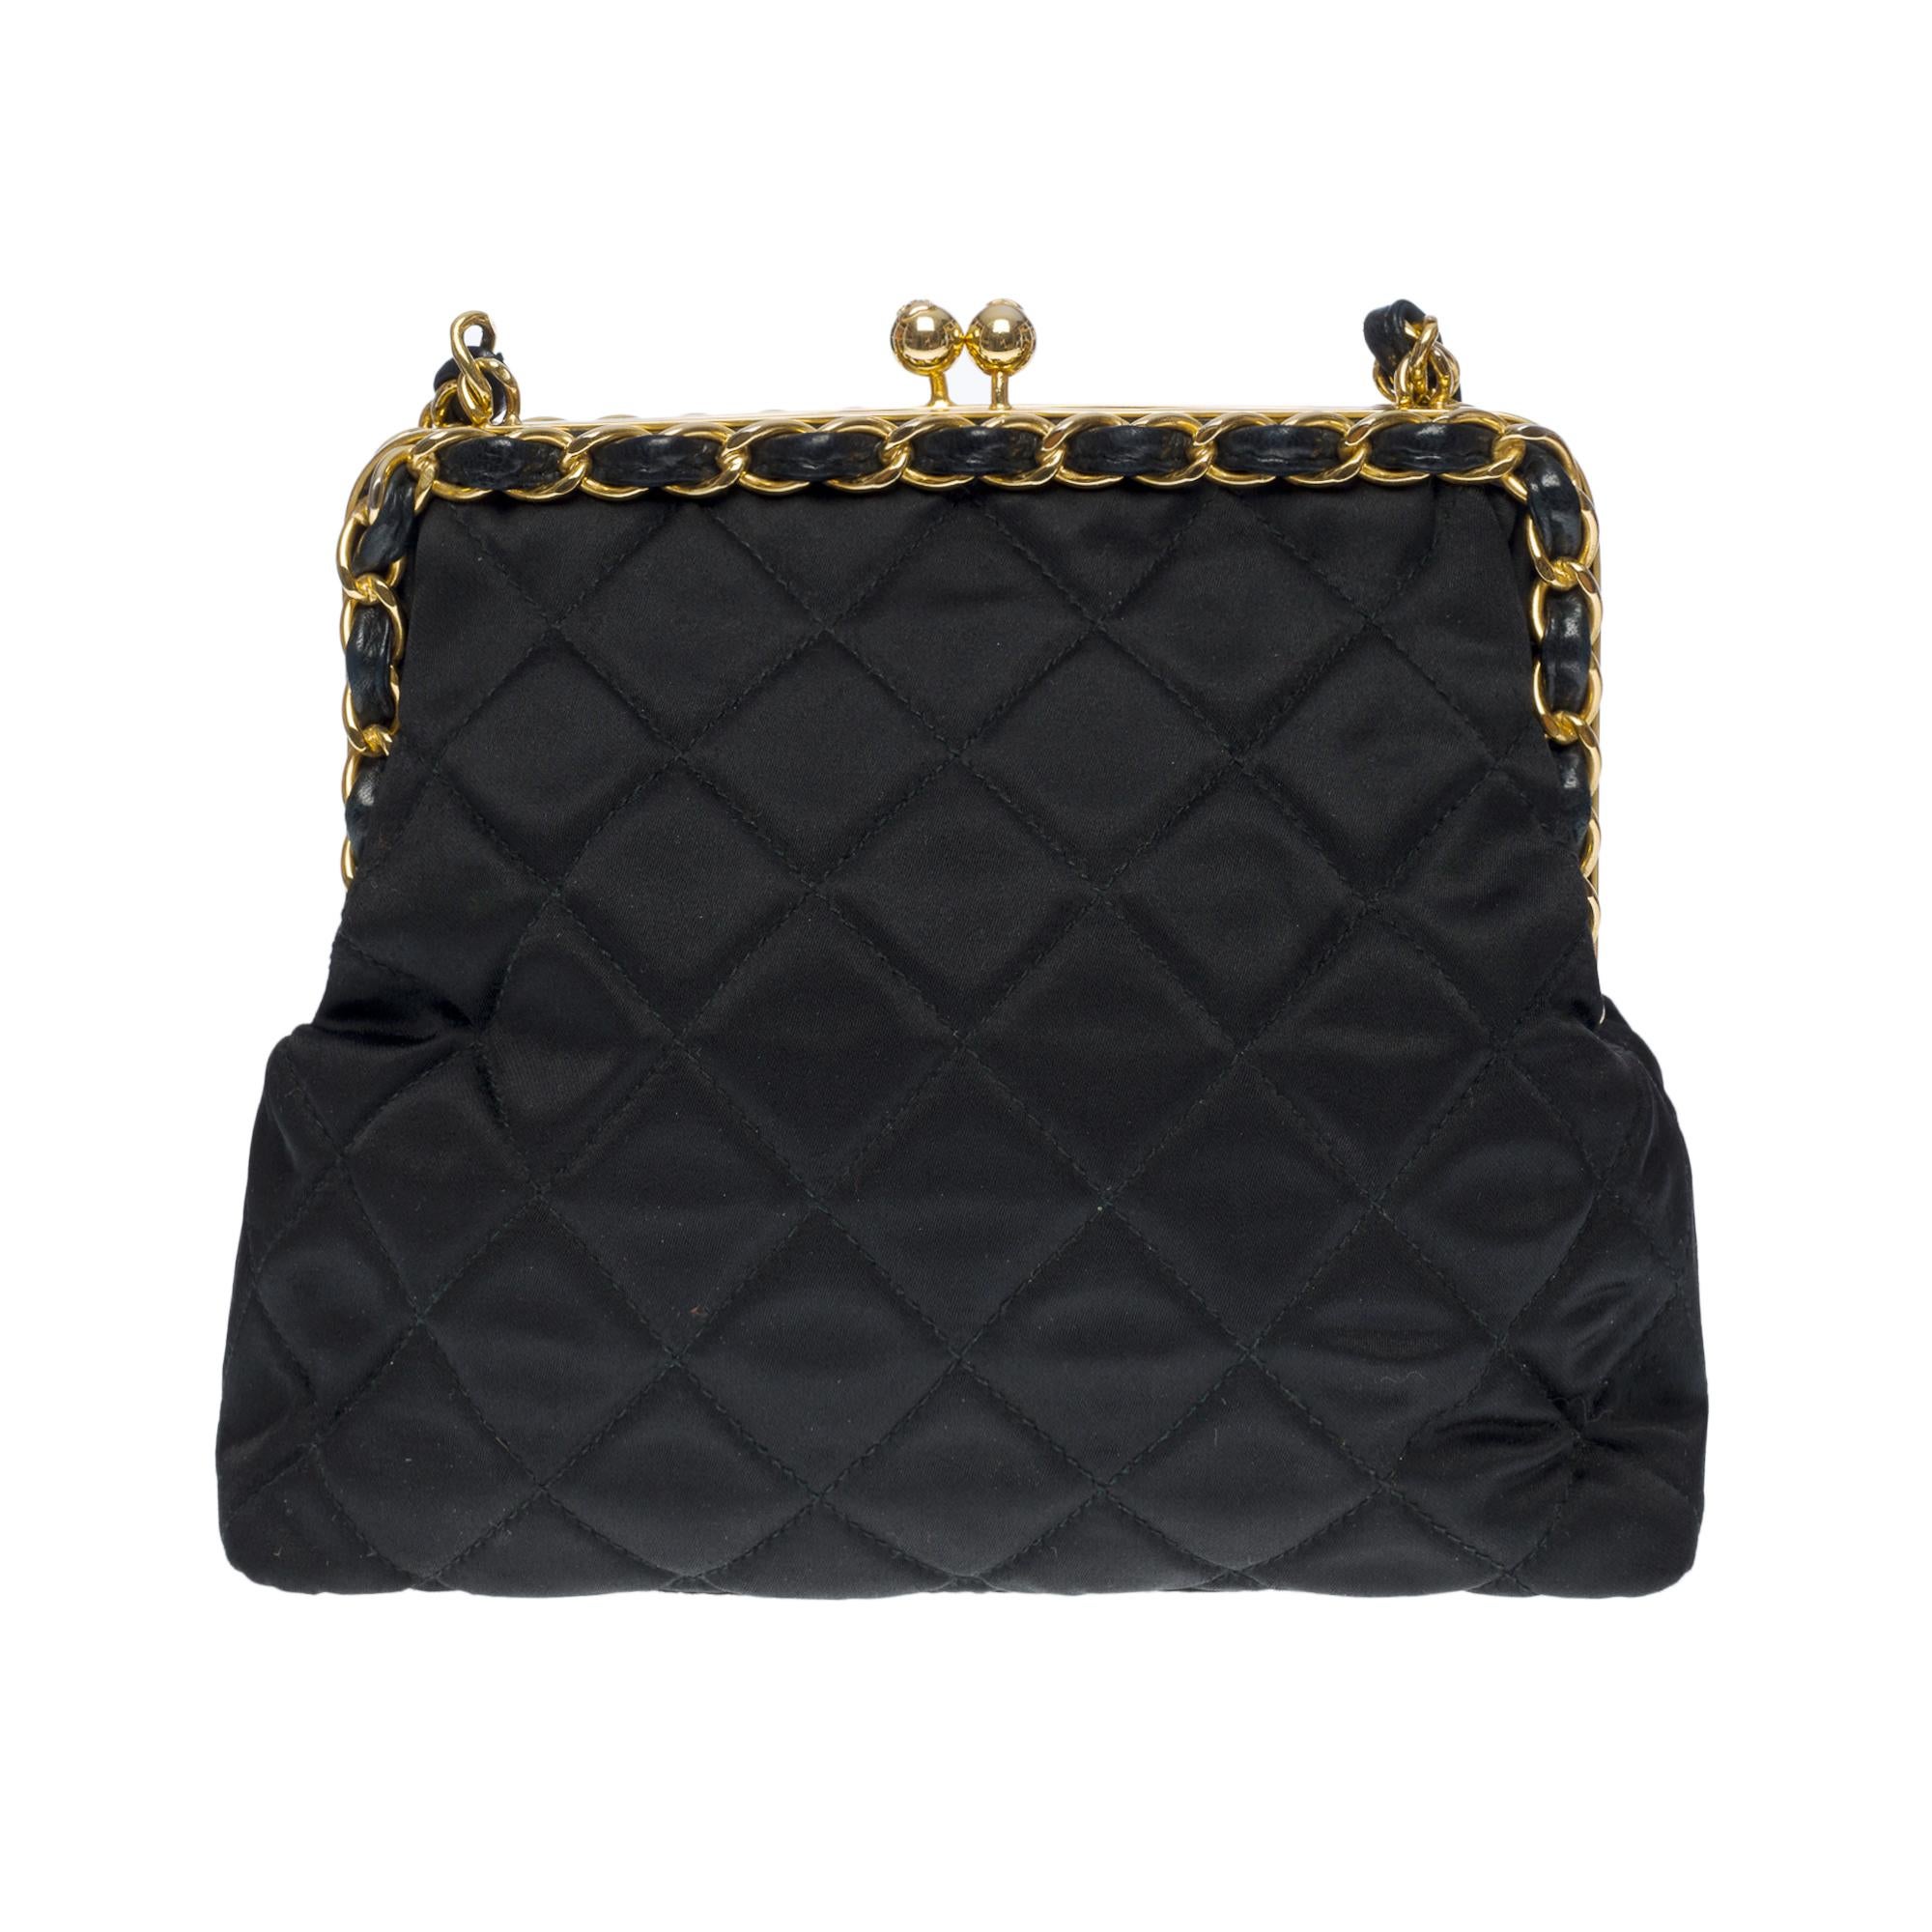 Collector & Rare Chanel du soir (Evening) shoulder bag in black quilted satin, gold plated metal hardware, black leather interlaced chain handle for hand, shoulder or in crossbody


Closure on the top by beads signed CC gold metal
Frame frame in